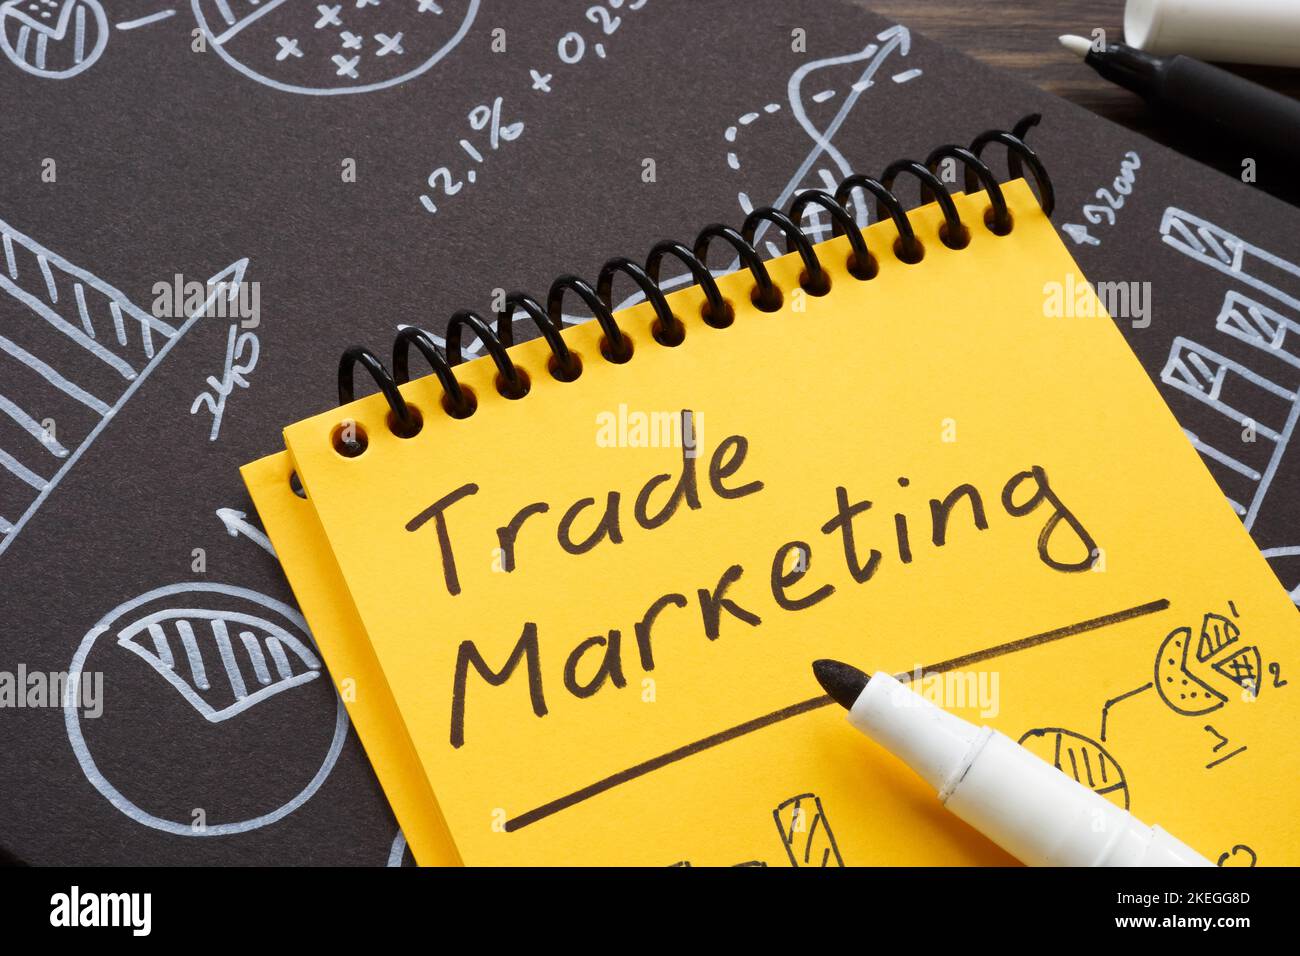 Marks with charts about trade marketing on the page. Stock Photo